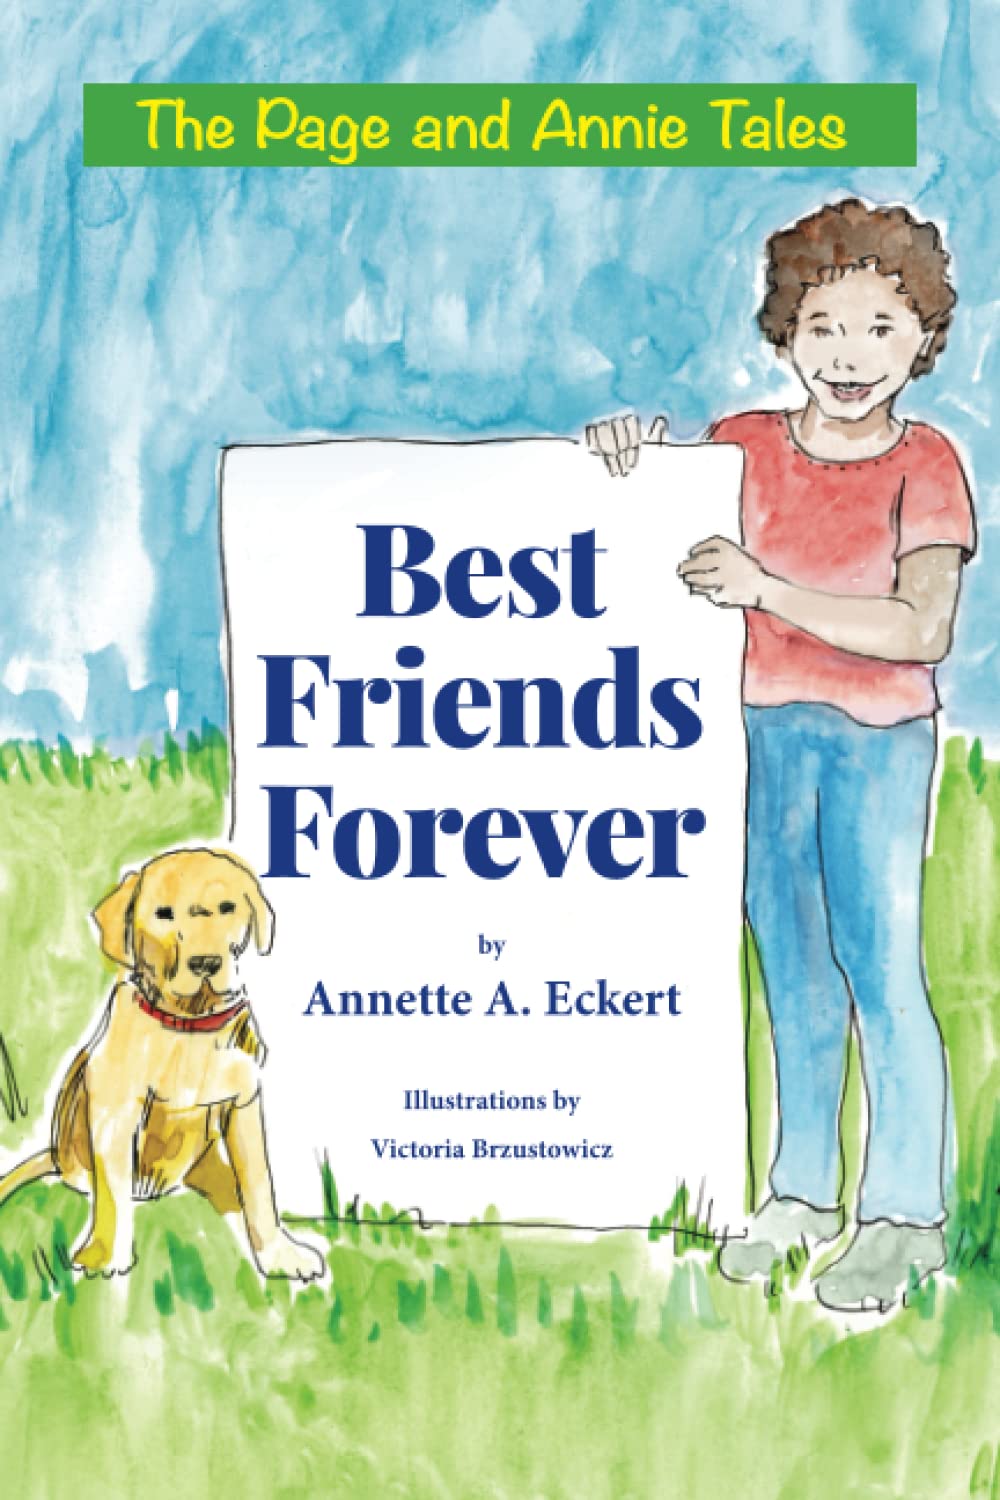 Annette A. Eckert ’73. In the first of the “Page and Annie Tales” children’s book series, Page, a dog, and Annie become best friends.